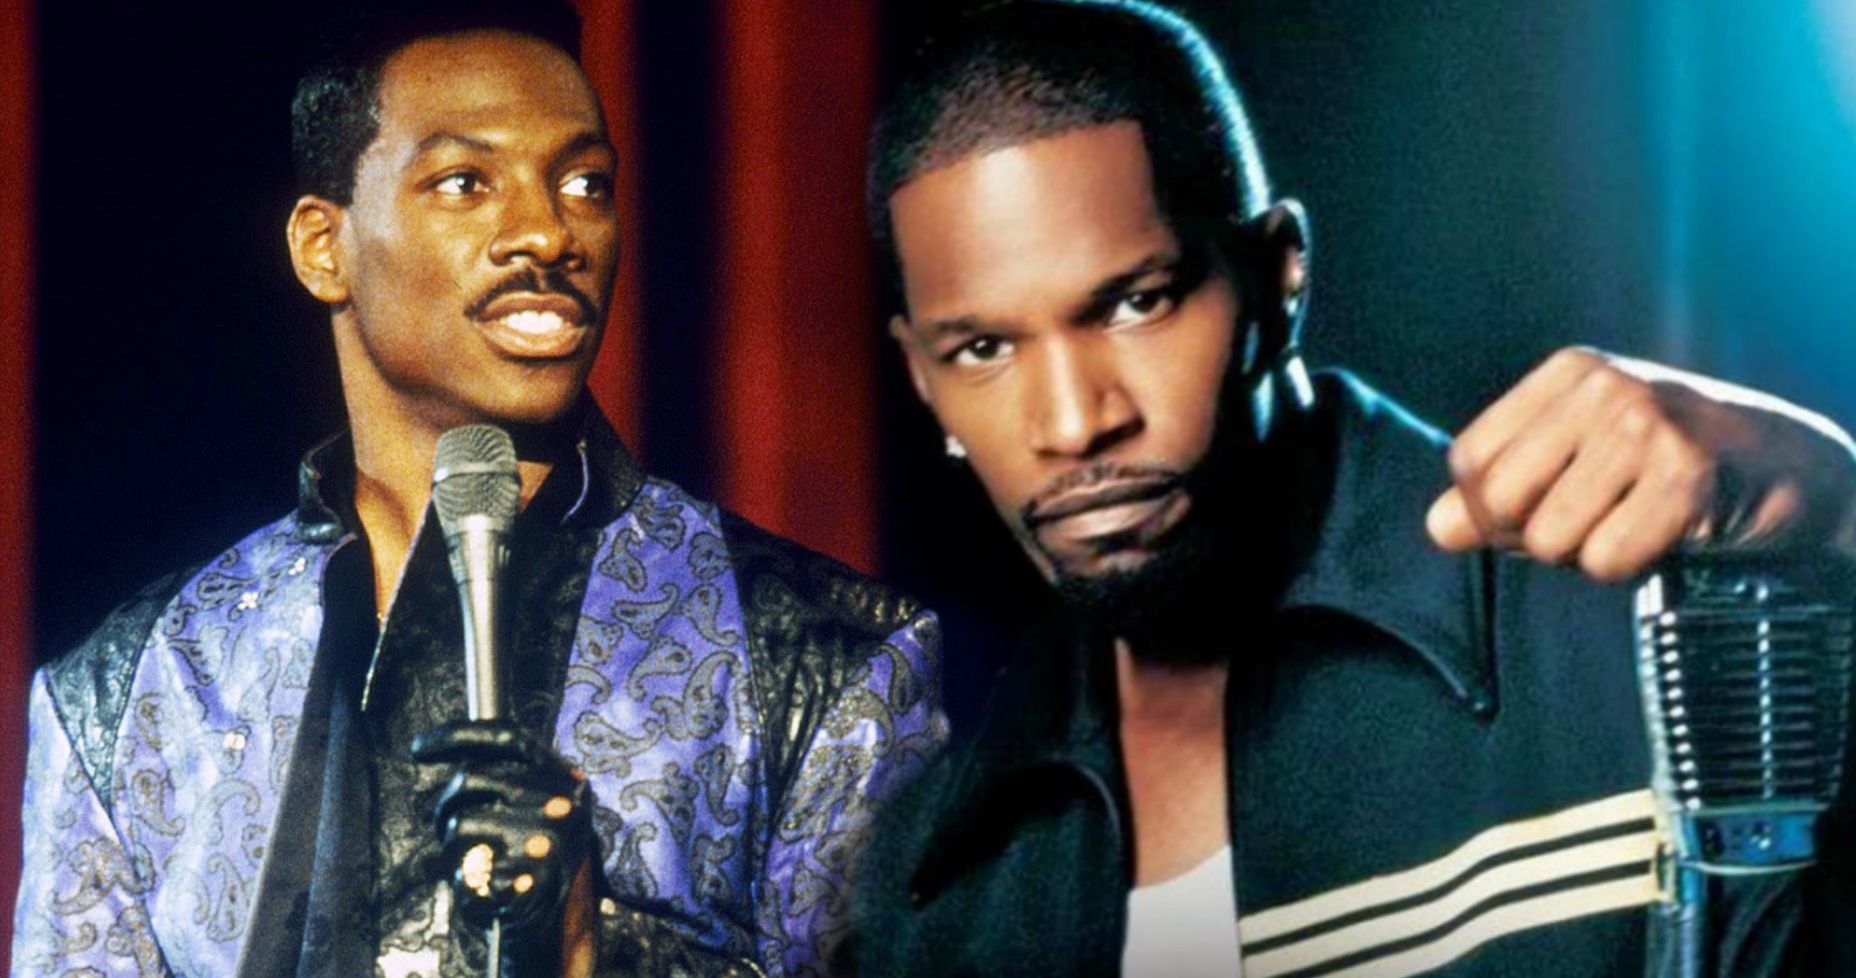 Jamie Foxx Wants Eddie Murphy to Join Him on a Stand-Up Comedy Tour